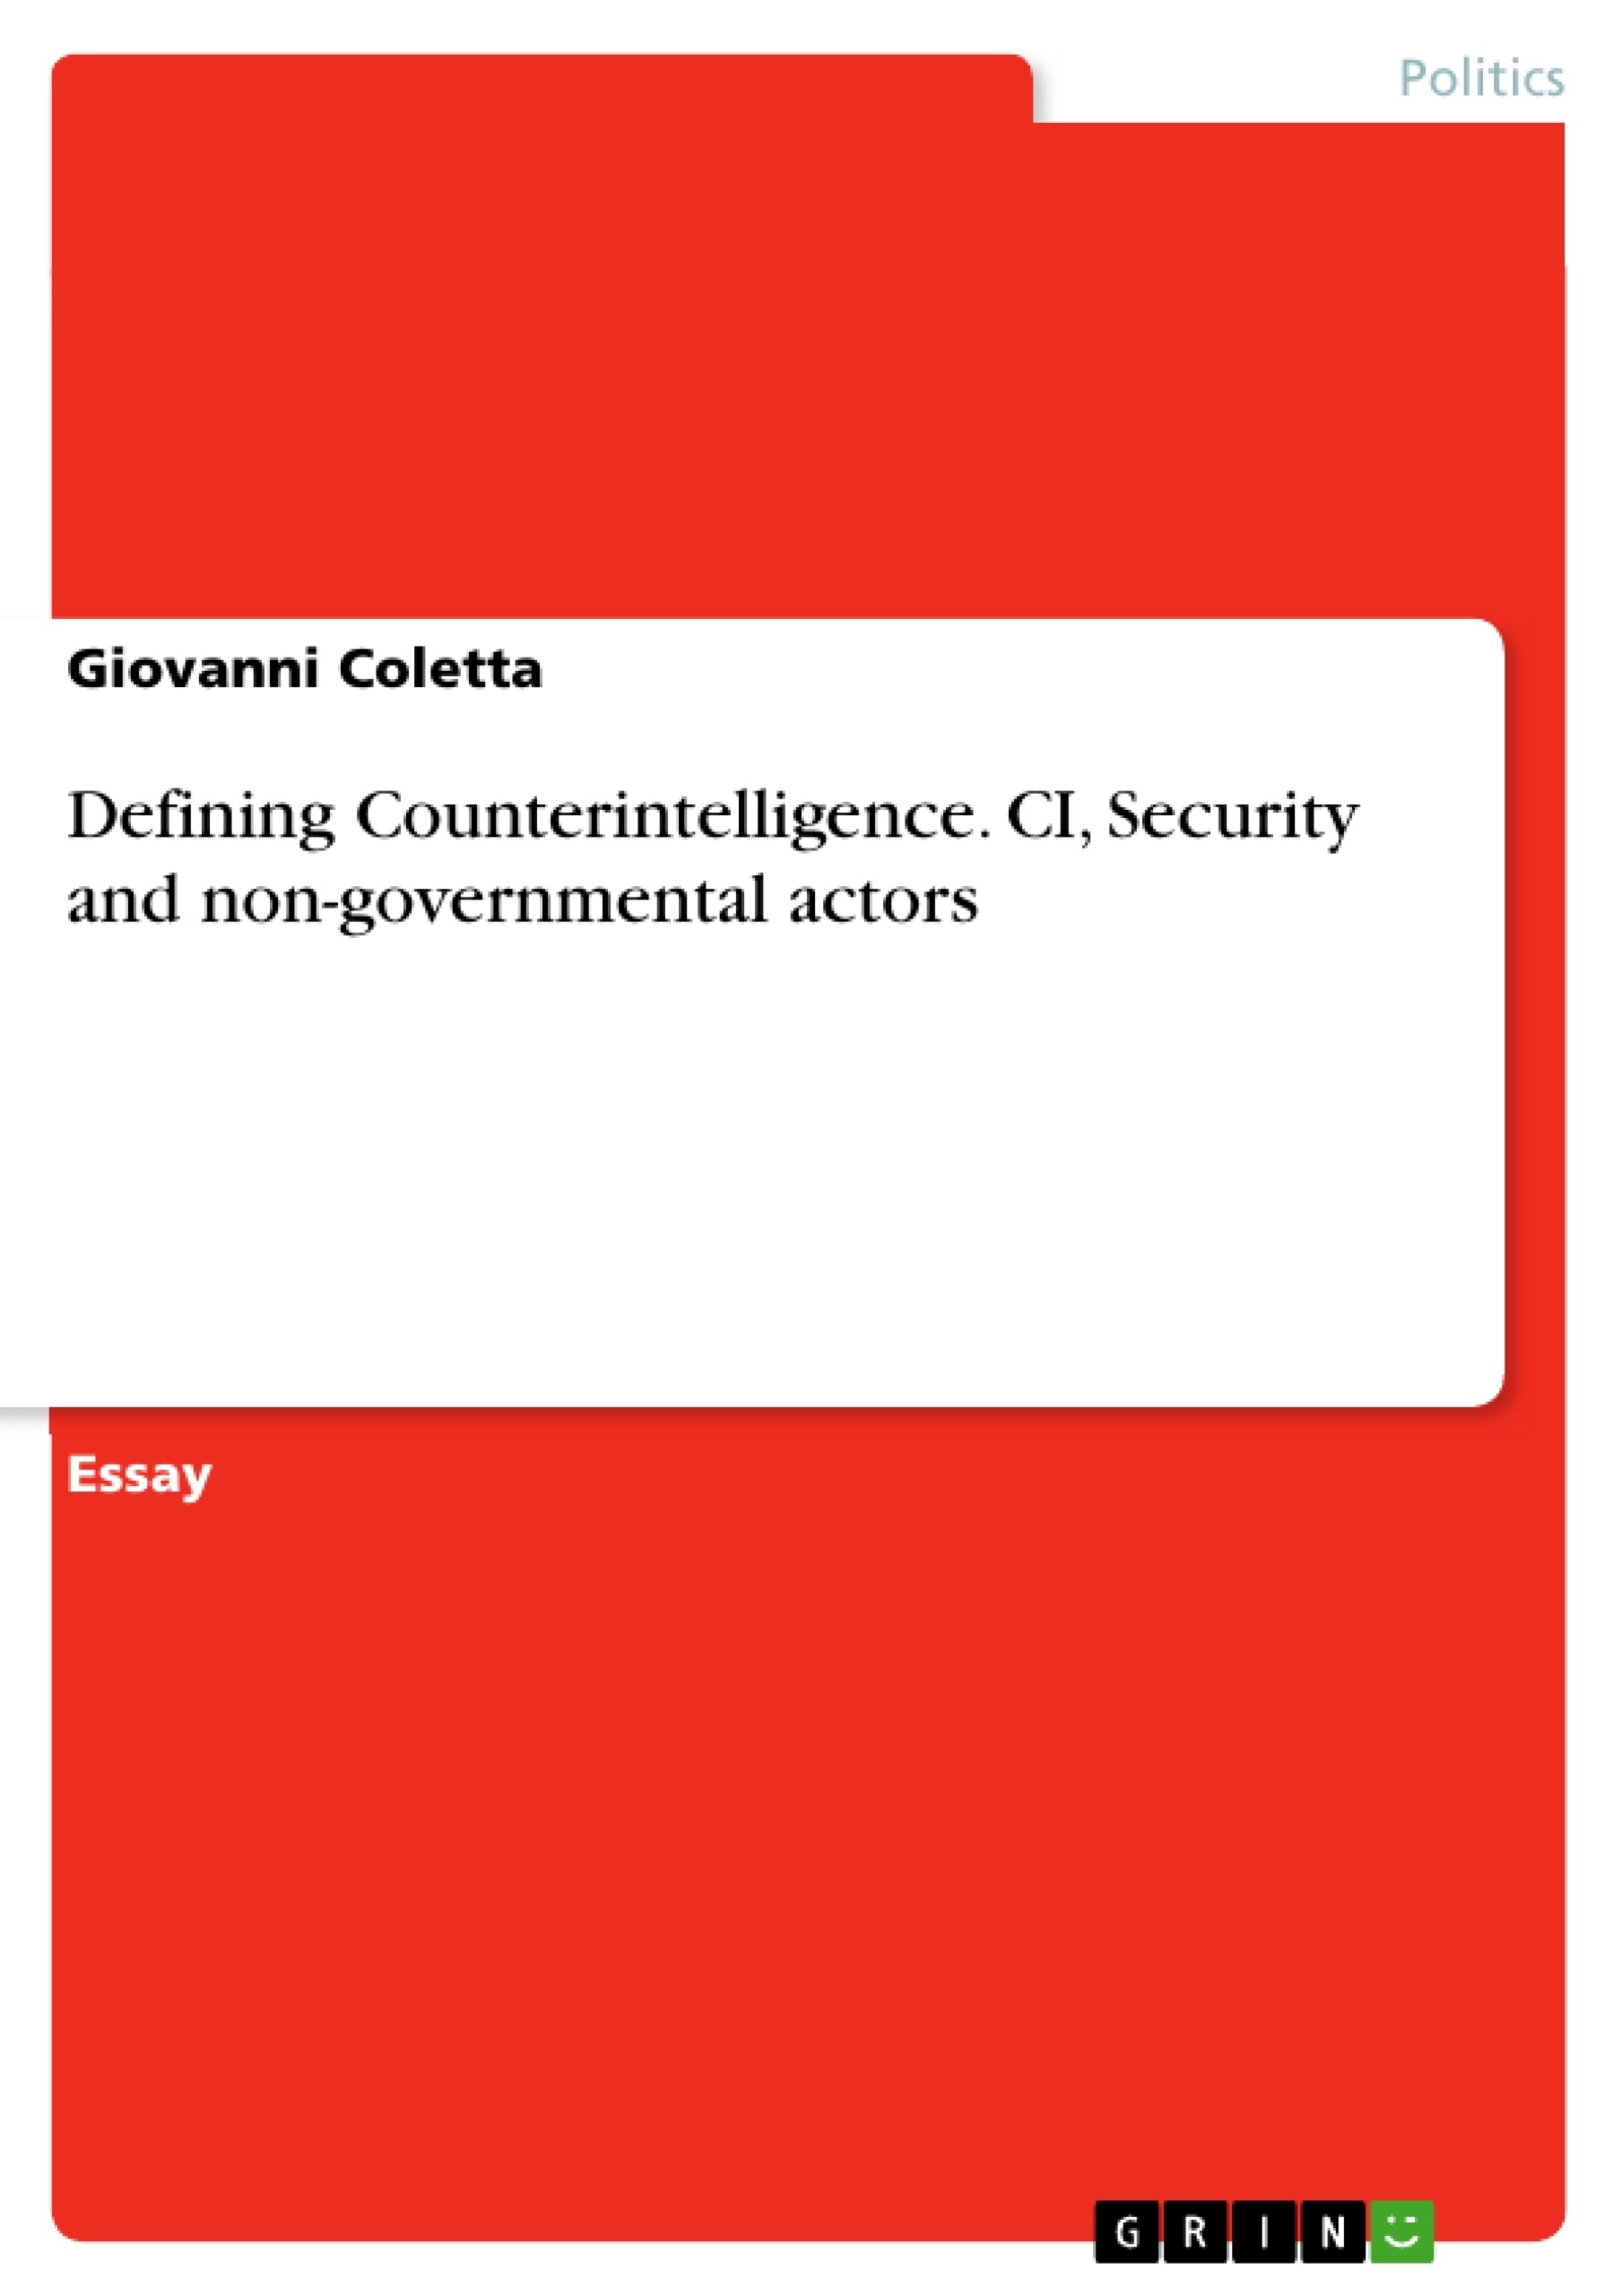 Title: Defining Counterintelligence. CI, Security and non-governmental actors